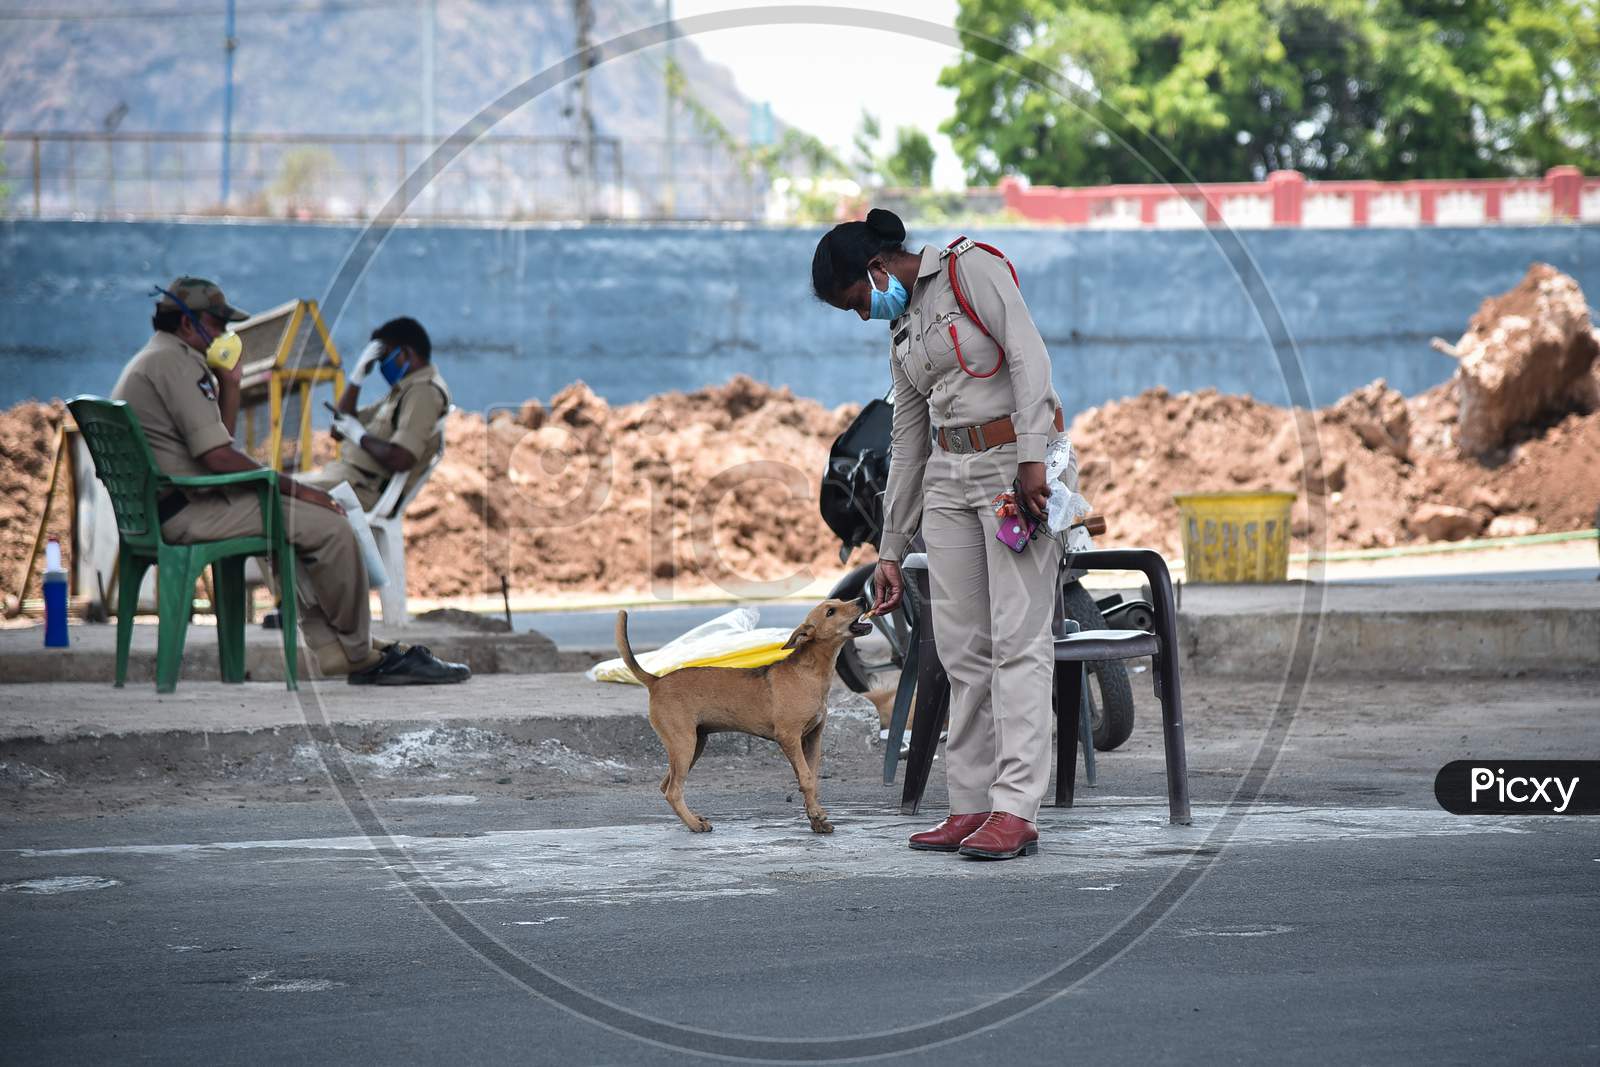 A Policewoman Feeds A Stray Dog During The Nationwide Lockdown Imposed In The Wake Of Coronavirus Pandemic, In Vijayawada.